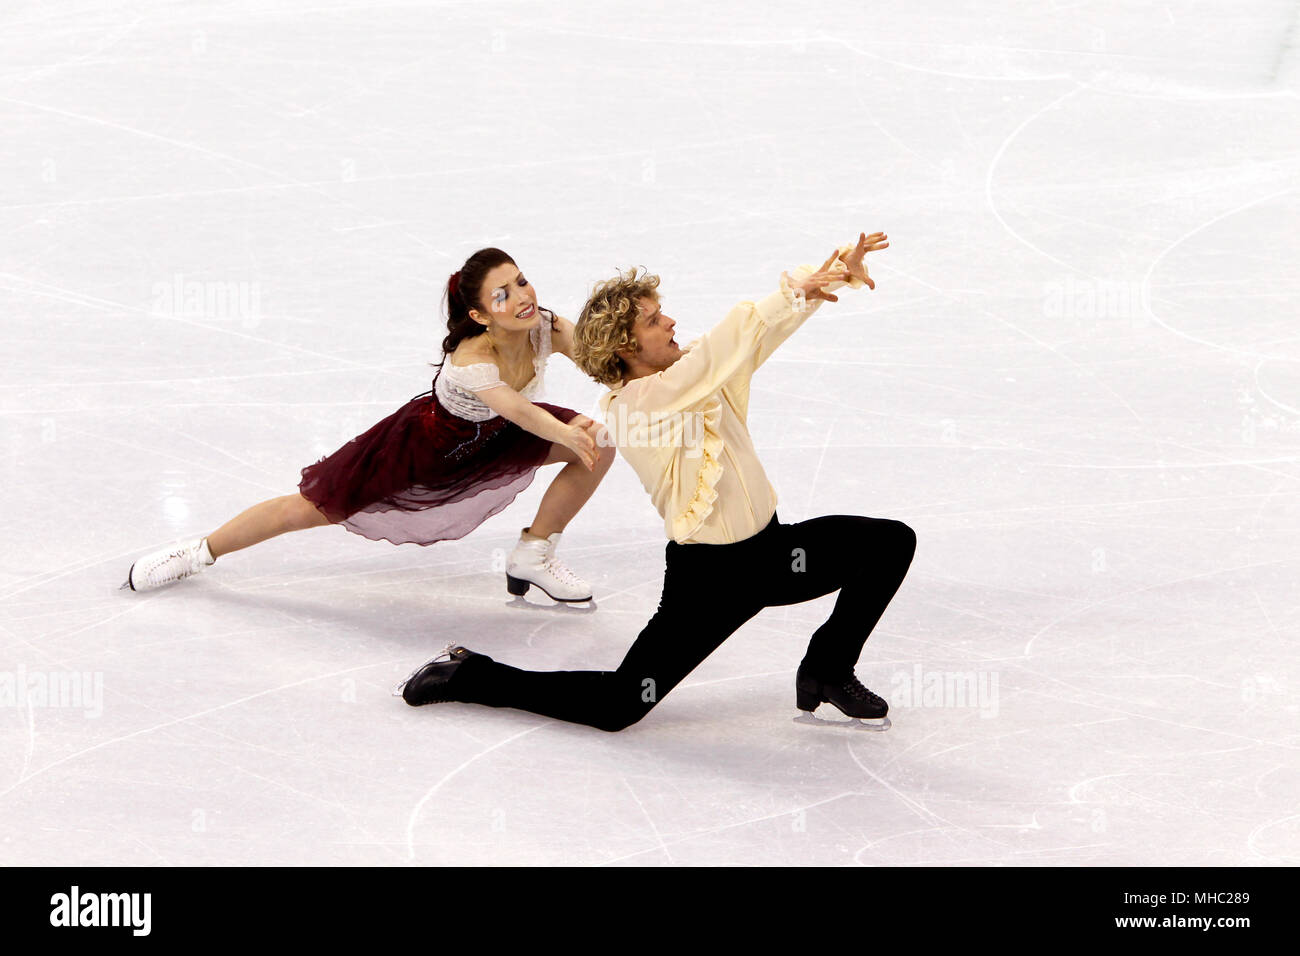 Merrill Davis and Charlie White of the United States during the Free Dance portion of the Ice Dancing Competition at the Vancouver Olympics, February 23, 2010.   They won the silver medal. Stock Photo